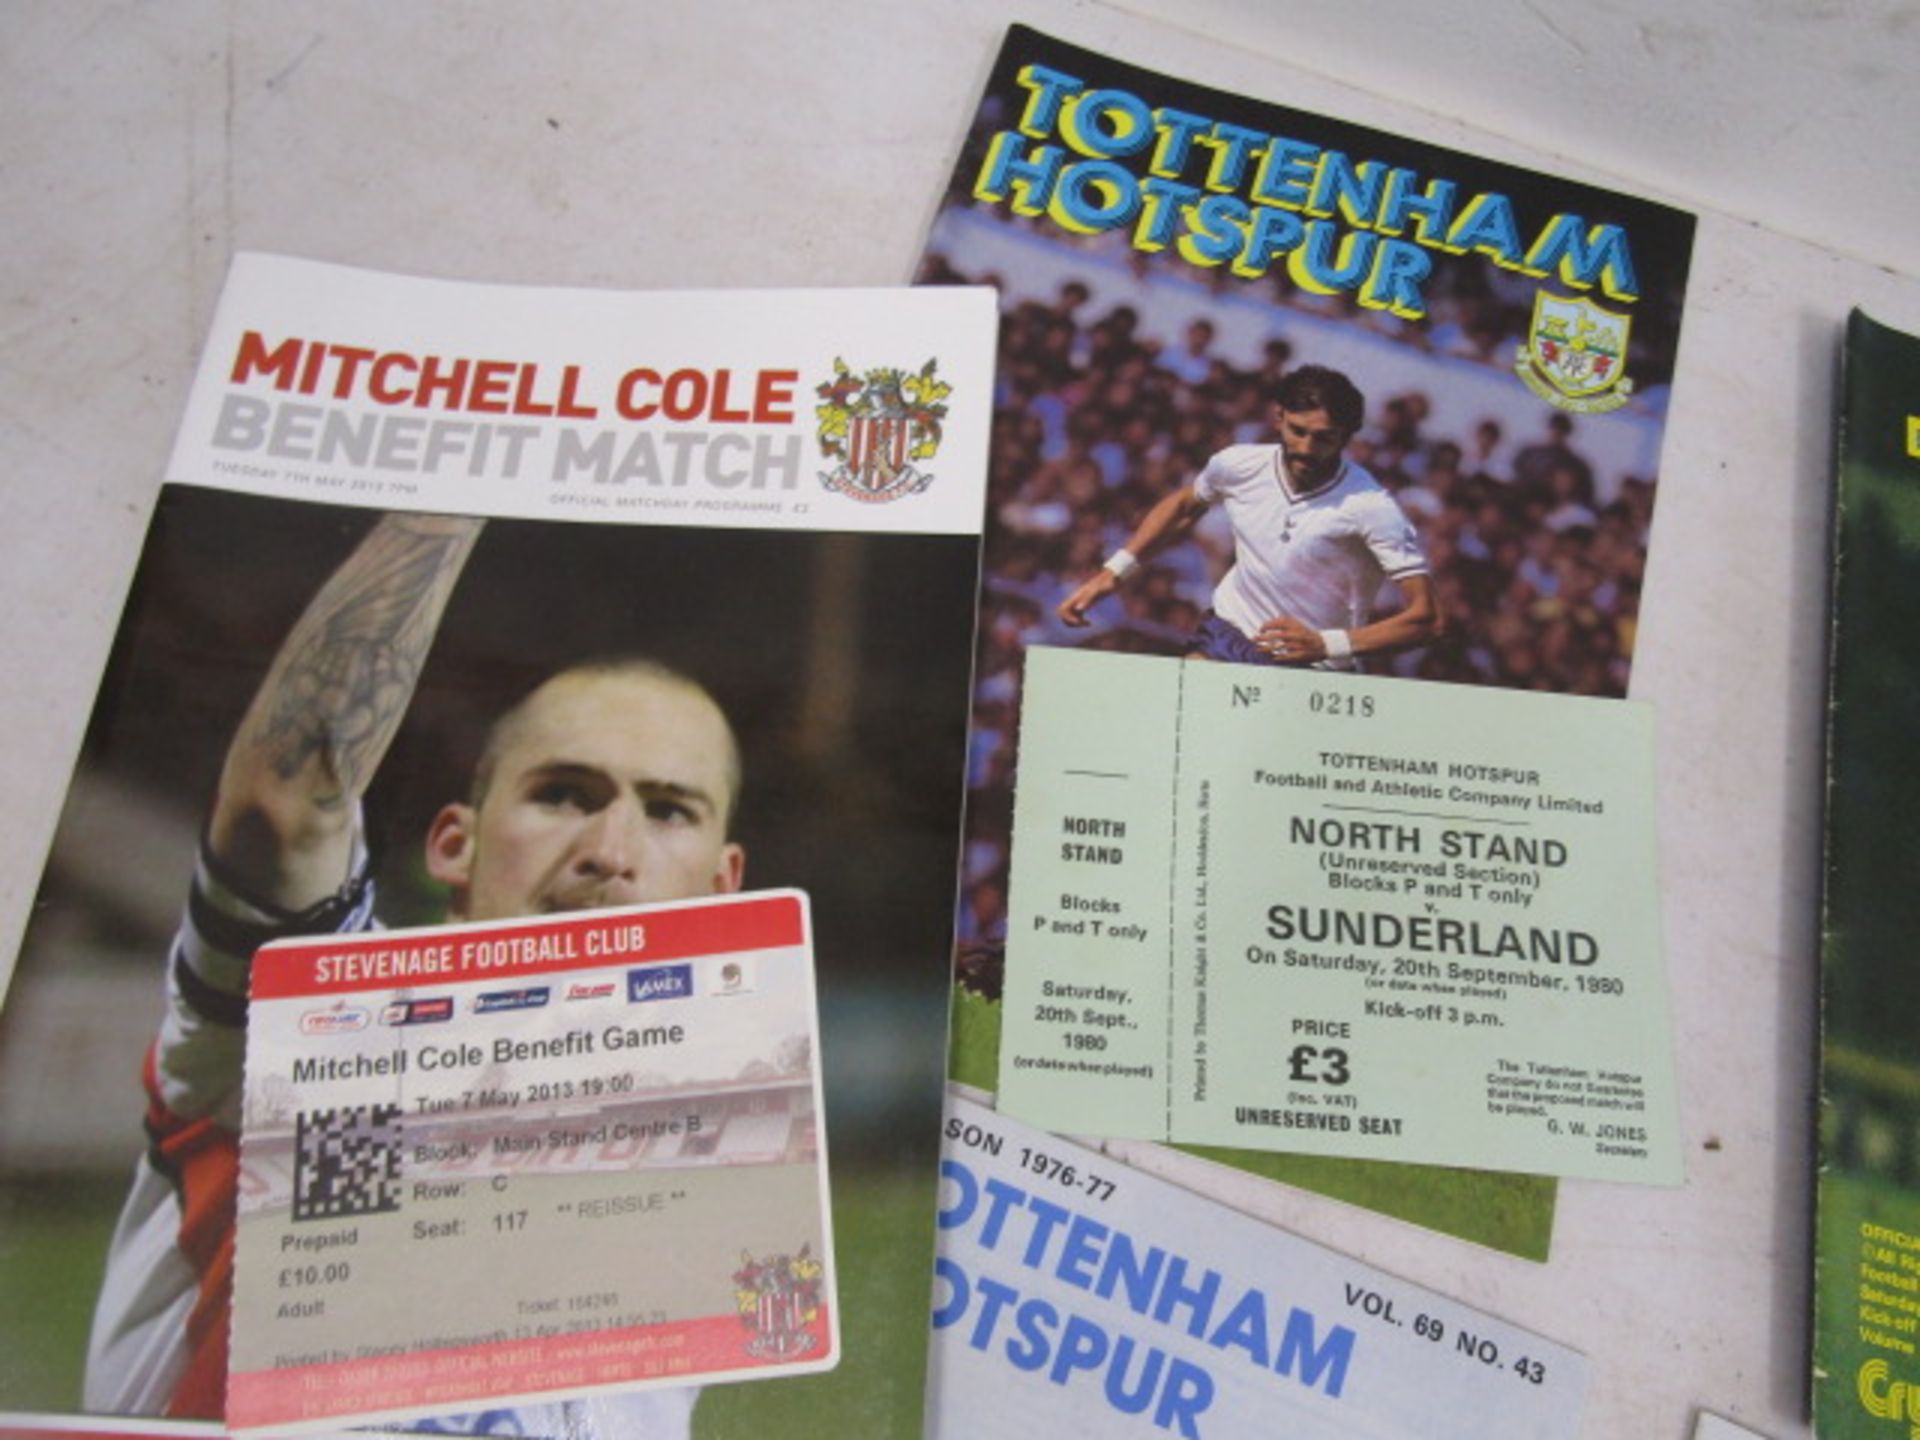 Tottenham Hot Spurs vintage programmes, 6 with original tickets plus 2 Stevenage with ticket and one - Image 3 of 10